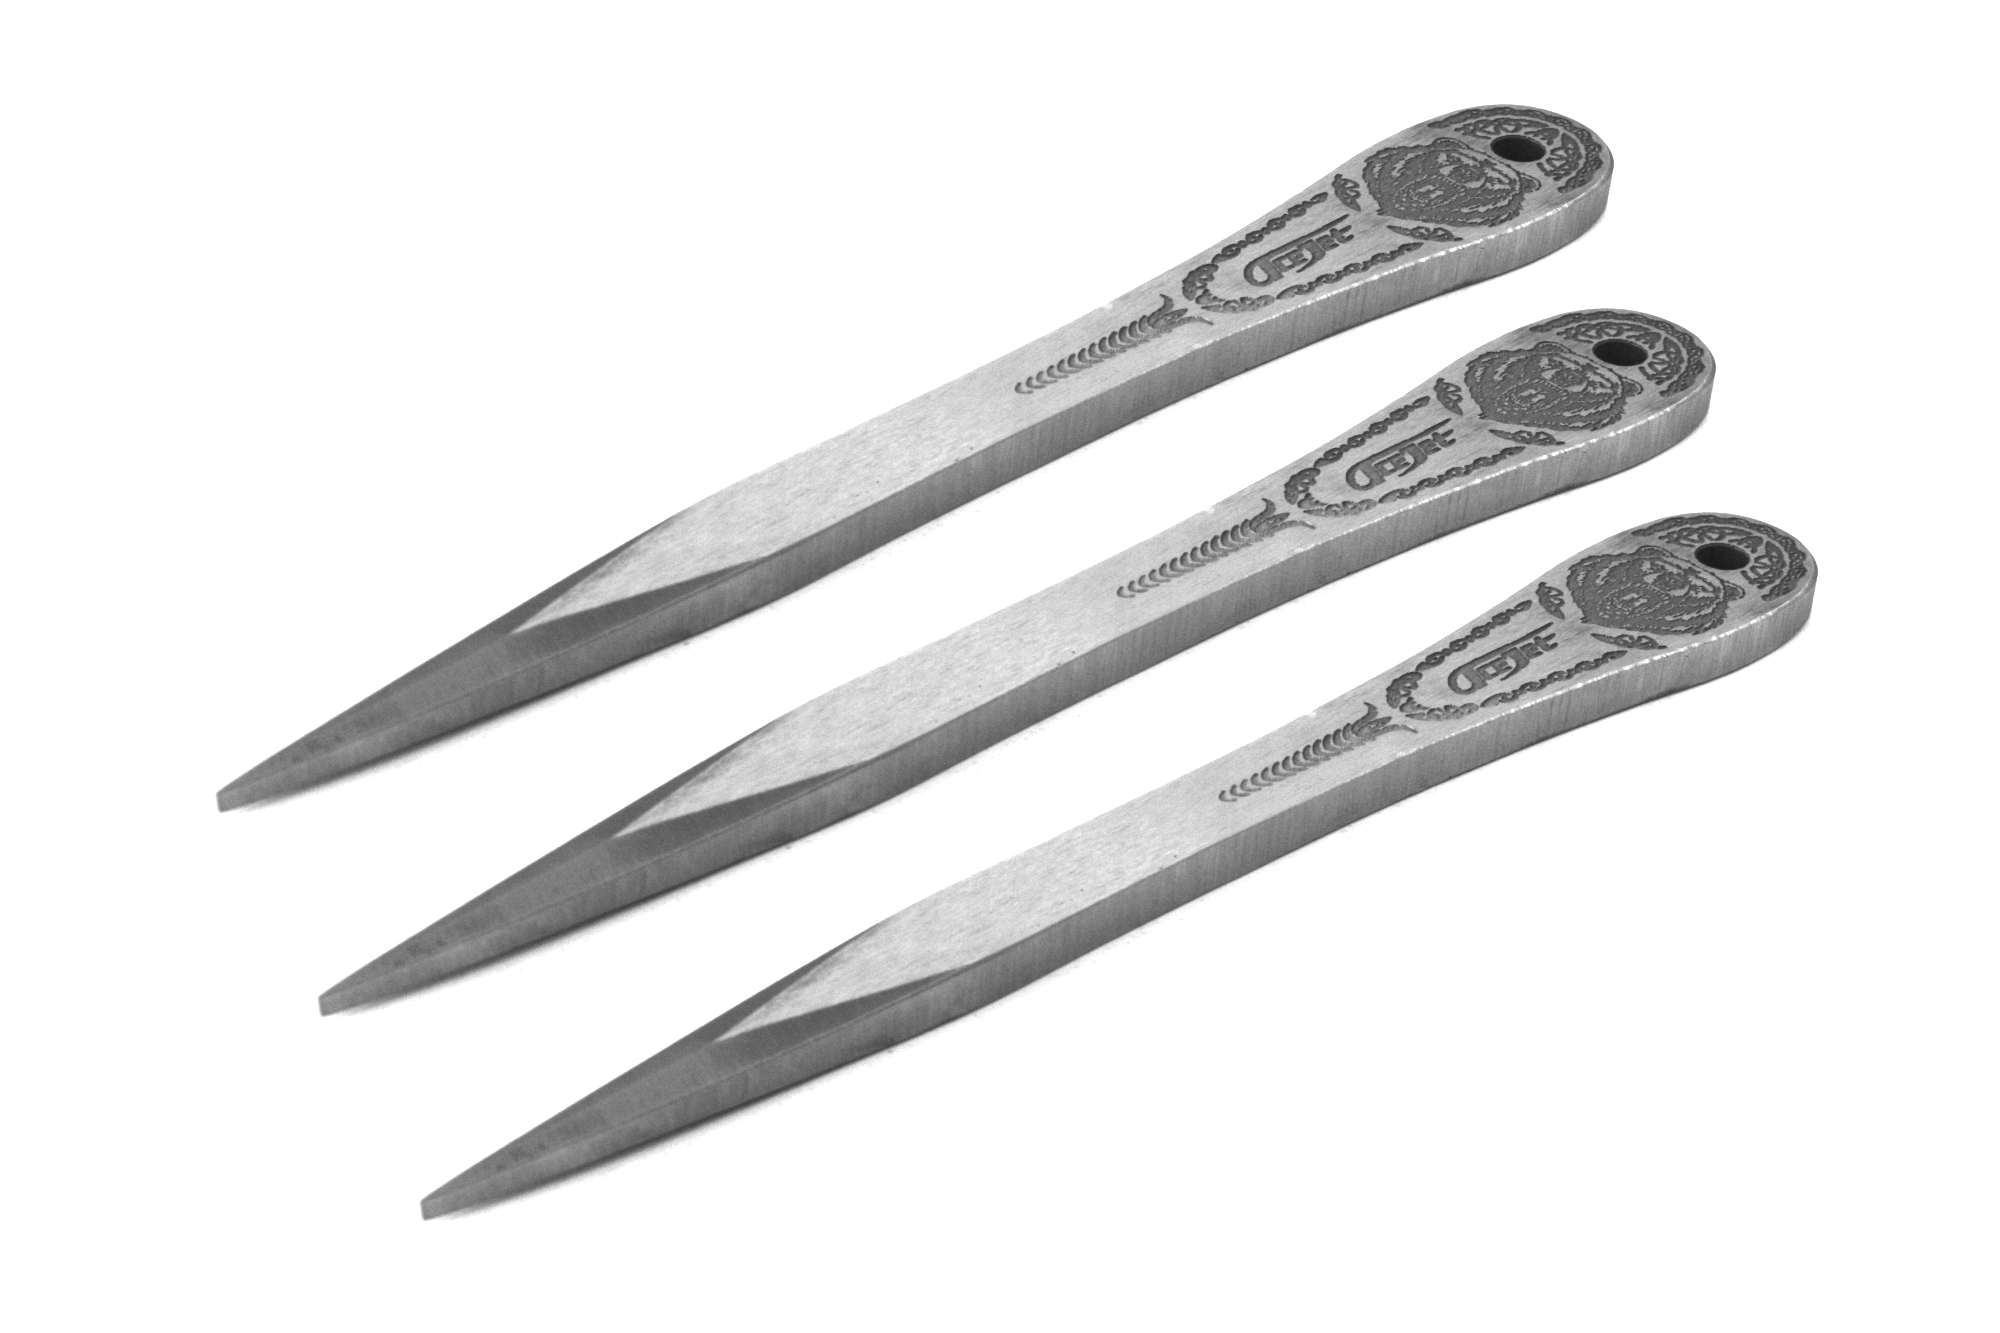 ACEJET STINGER D2 Grizzly Clear - Throwing knife - set of 3